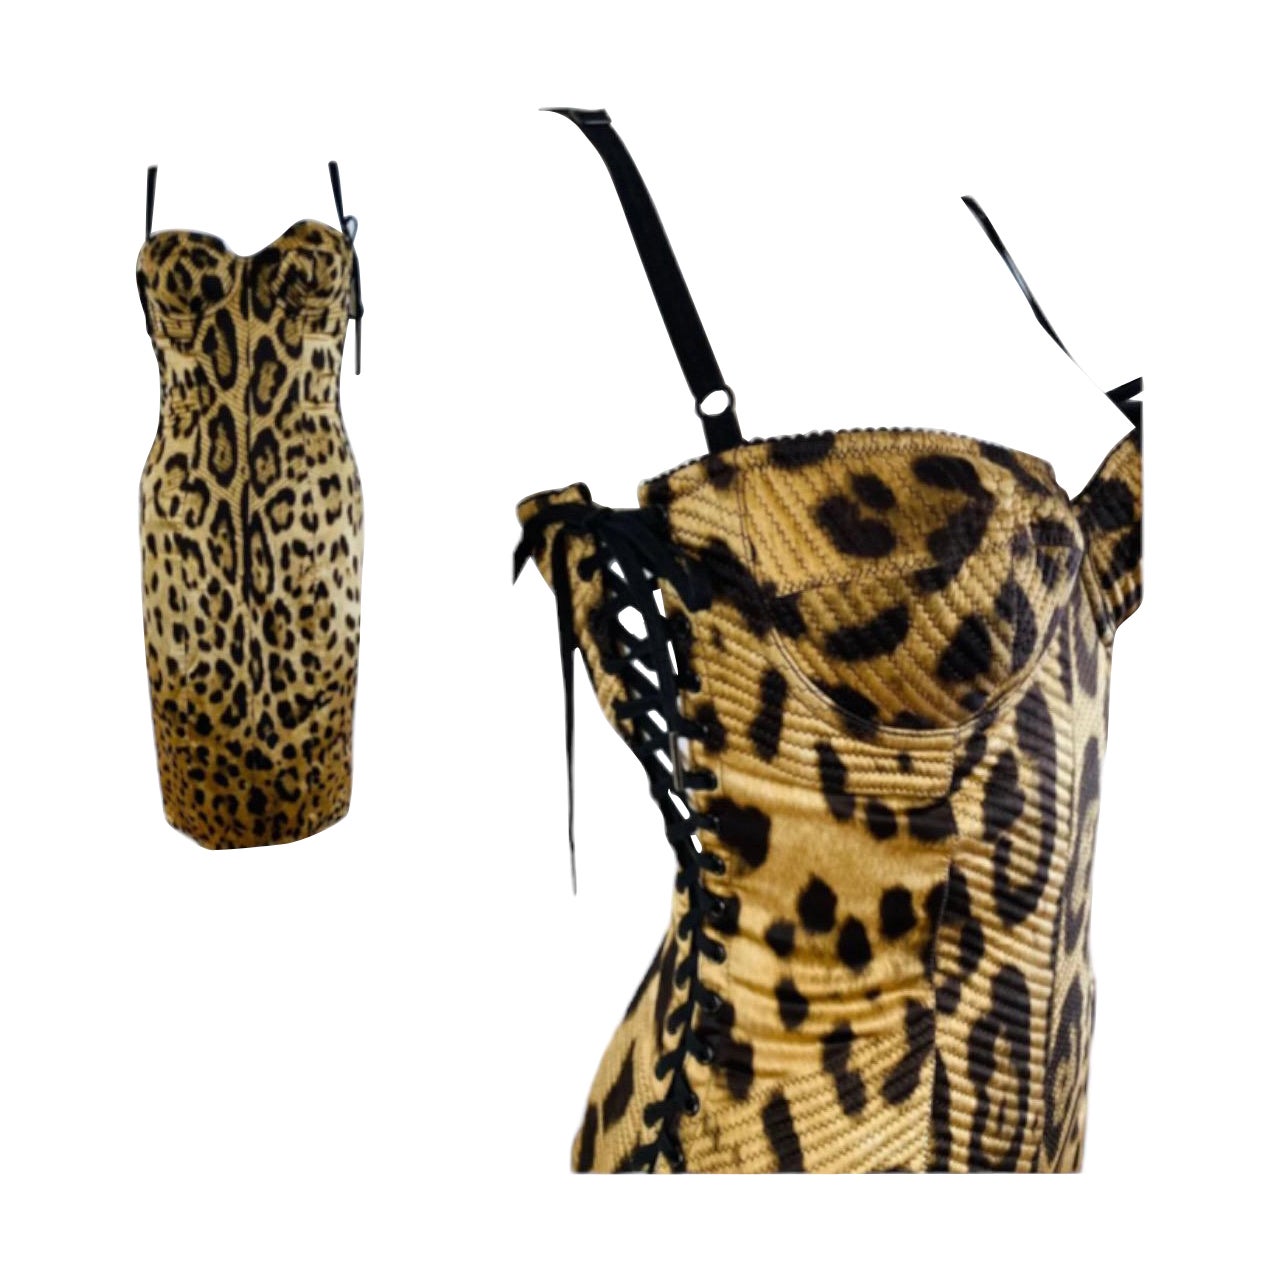 Gorgeous vintage Dolce + Gabbana corset style dress
Iconic Dolce + Gabbana leopard print silk + elastane fabric
Quilted details on bust + bodice
Bustier bra style bust with fitted bust cups
Thin adjustable shoulder straps
Fitted bodice with side